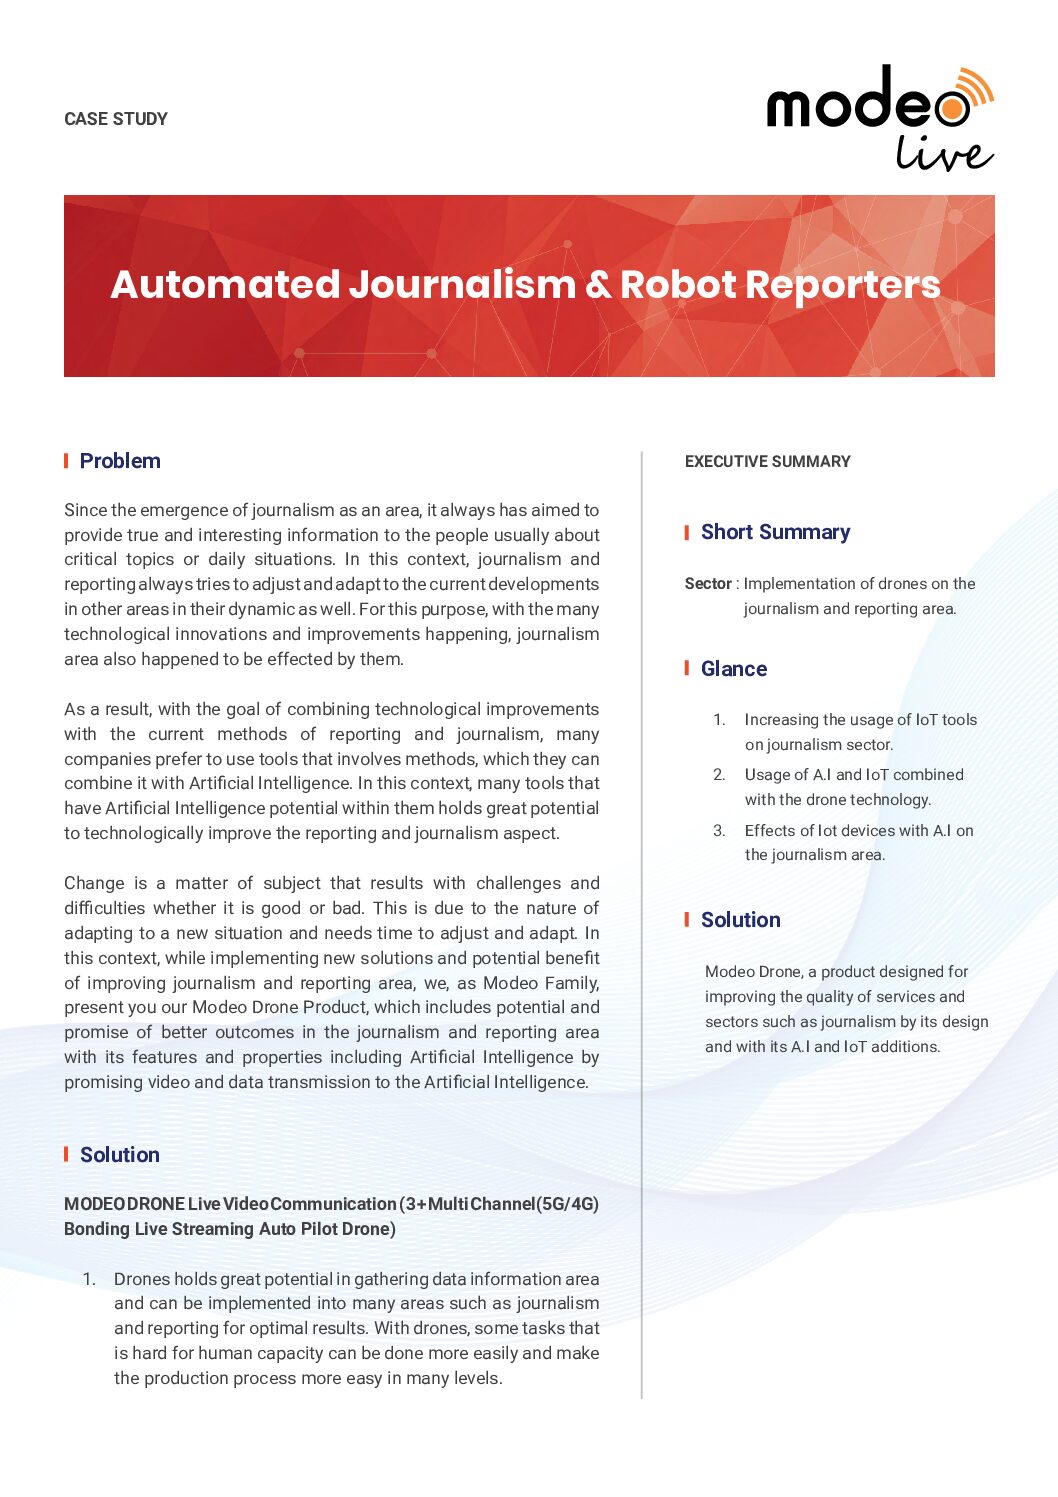 CTech | Automated-Journalism-Robot-Reporters